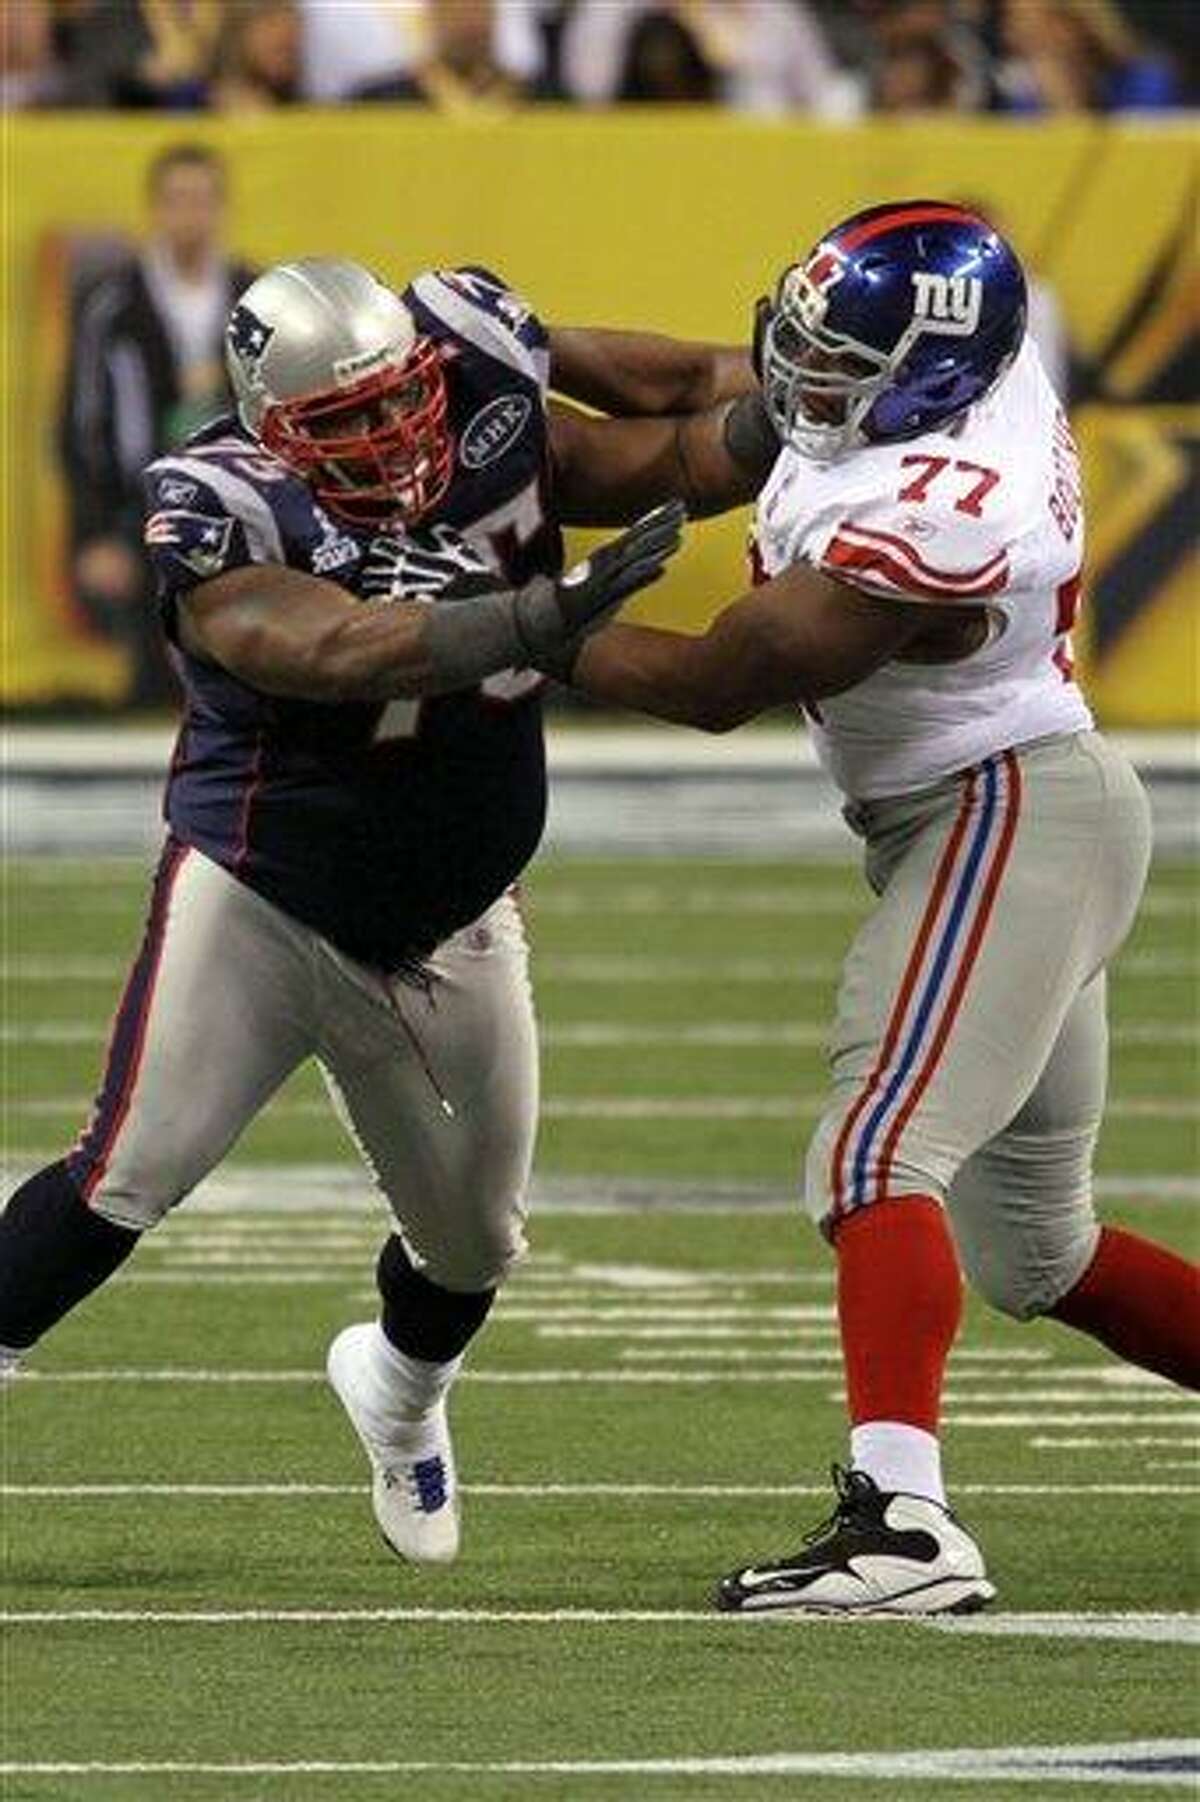 New England Patriots Vince Wilfork #75 in action against New York Giants Kevin Boothe #75 at Super Bowl XLVI on Sunday, February 5, 2012 in Indianapolis, IN. The Giants defeated the Patriots 21-17. (AP Photo/Gregory Payan)